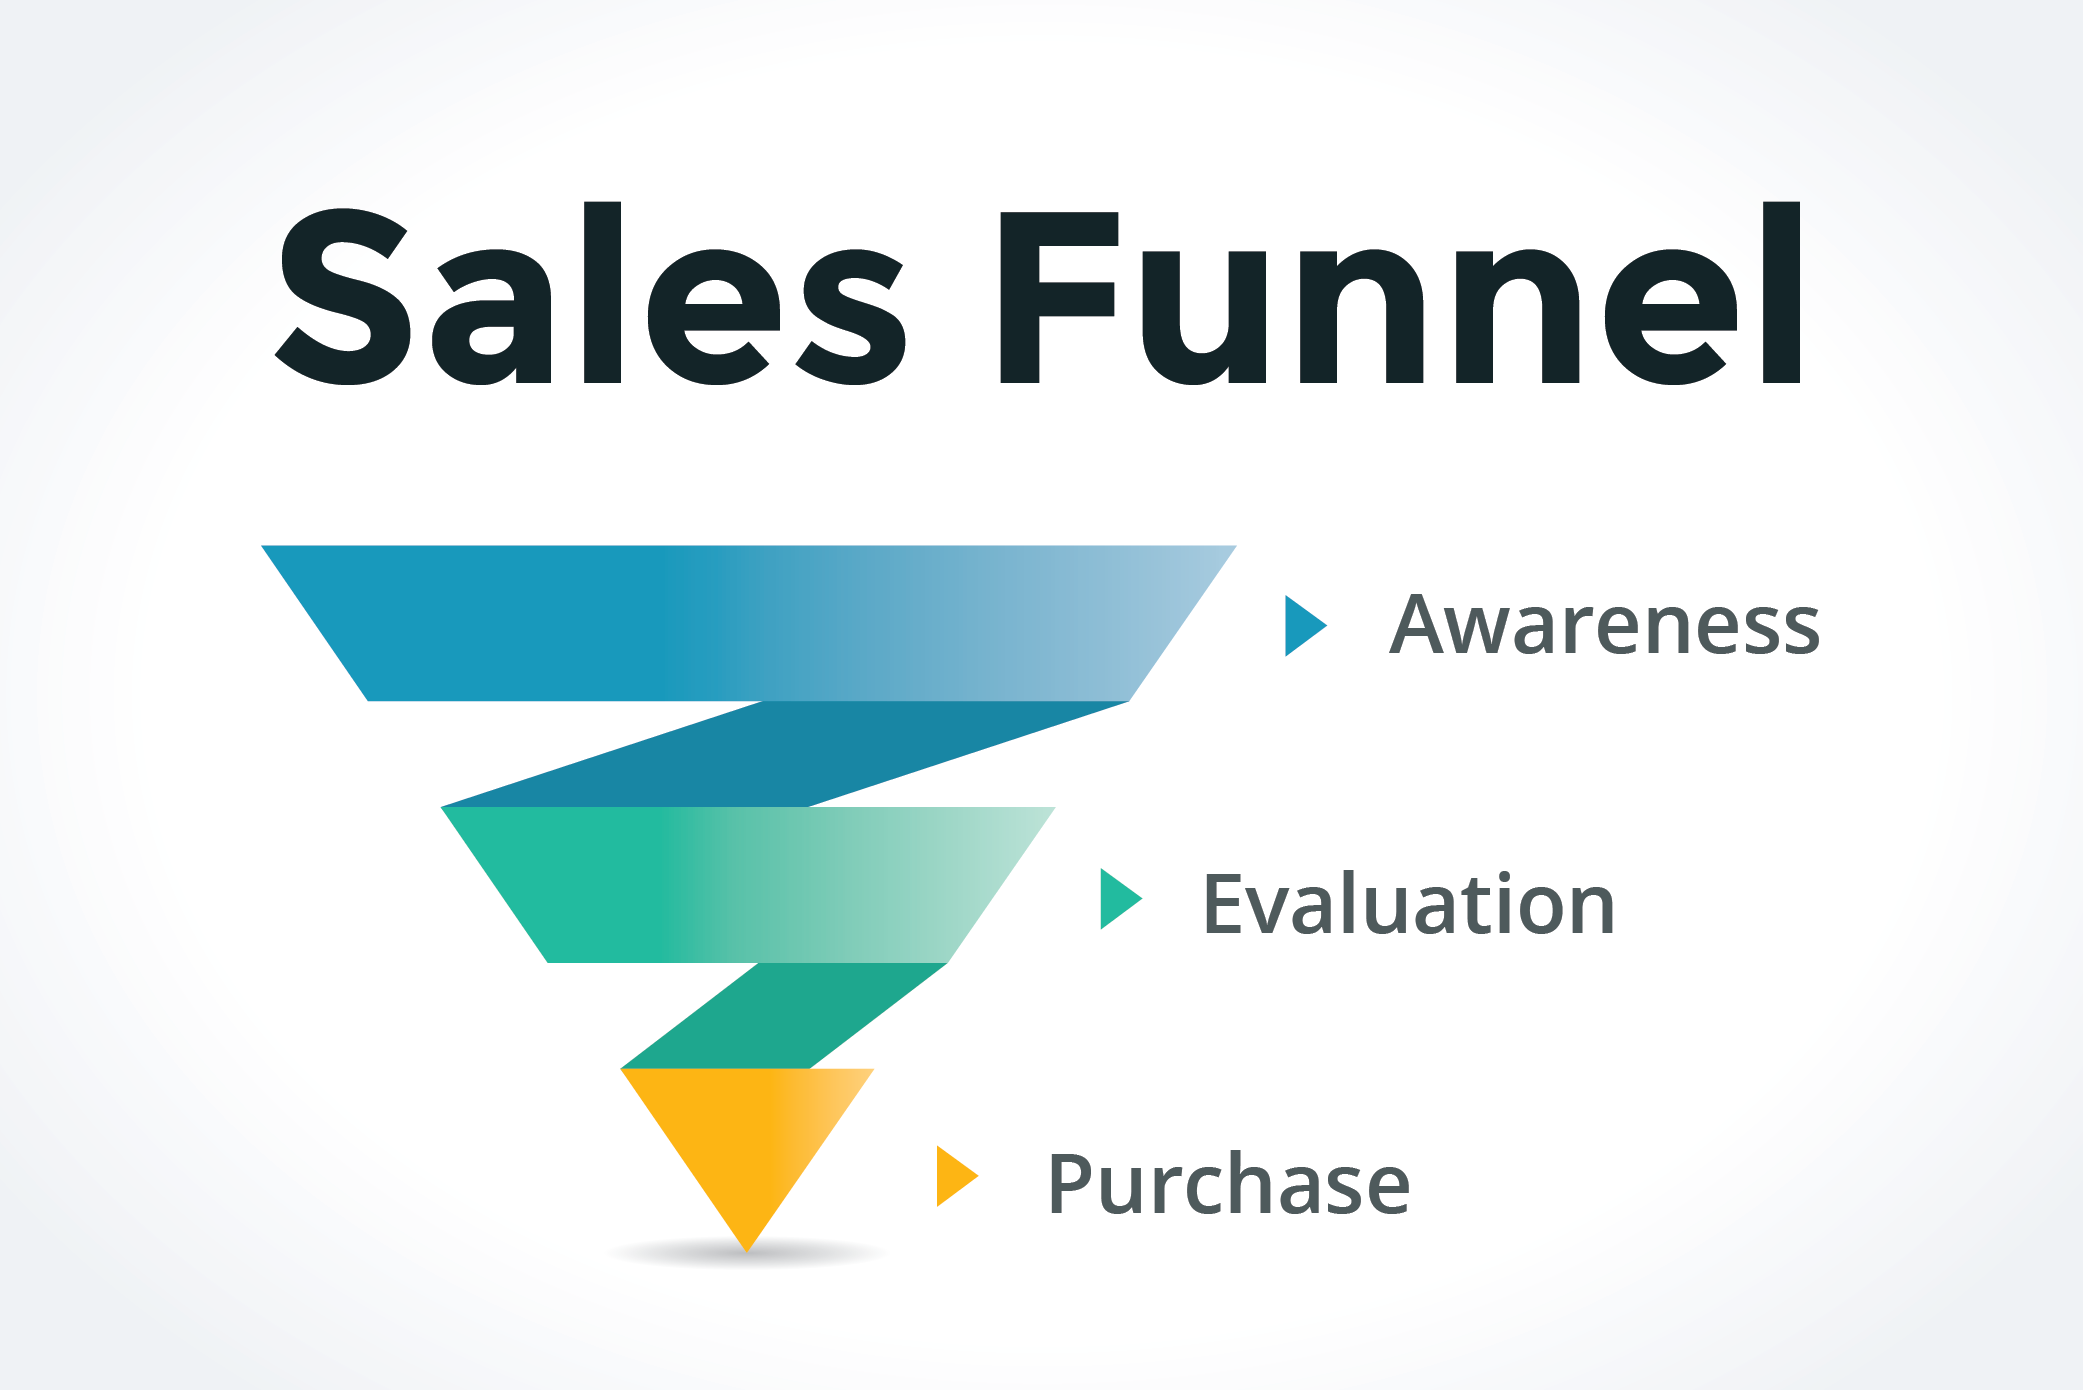 Content Marketing Sales Funnel